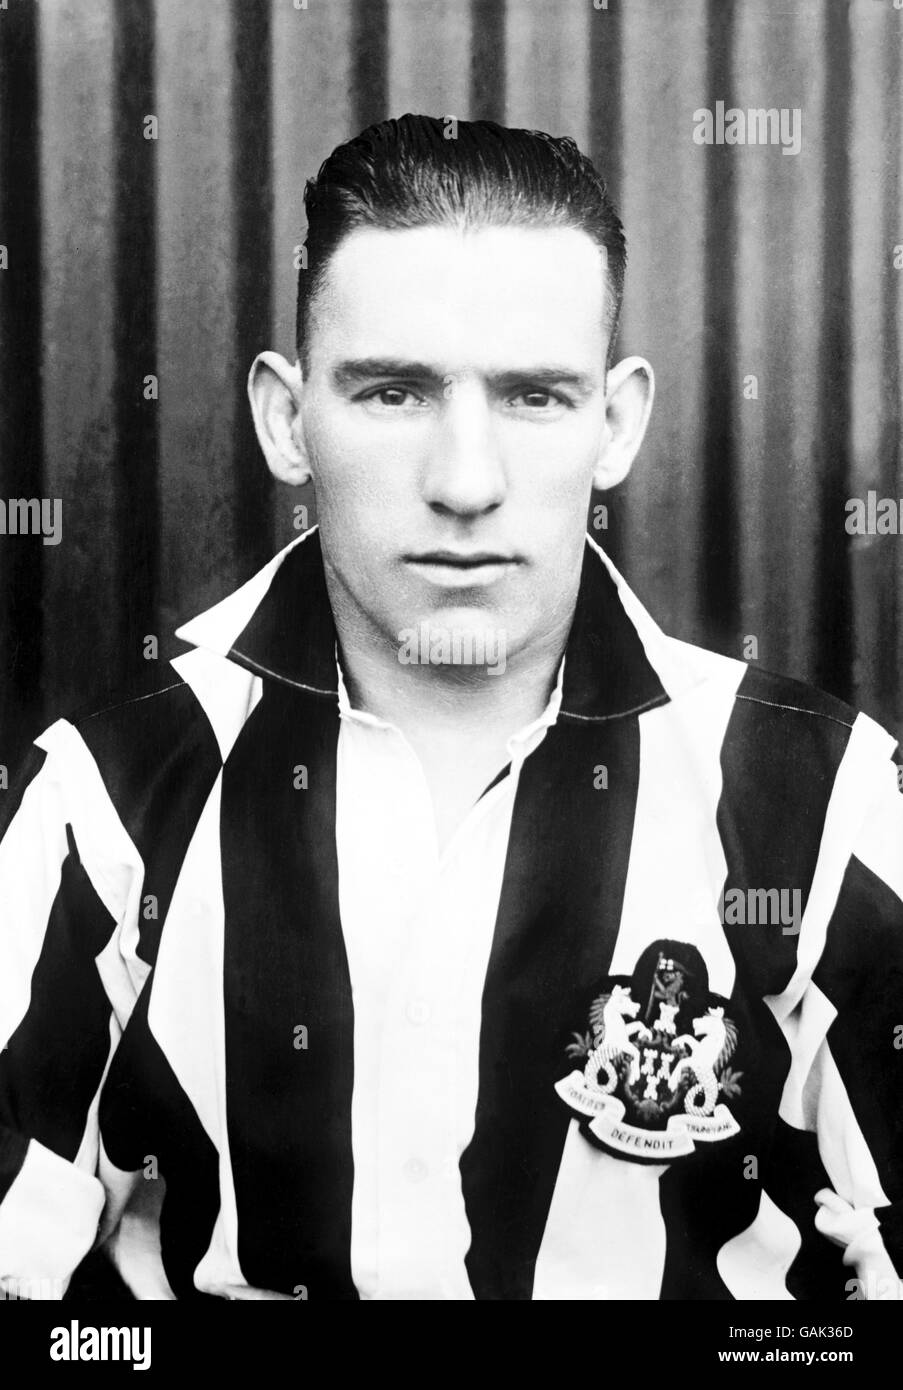 Fußball - Football League Division One - Newcastle United Photocall. Jimmy Nelson, Newcastle United Stockfoto